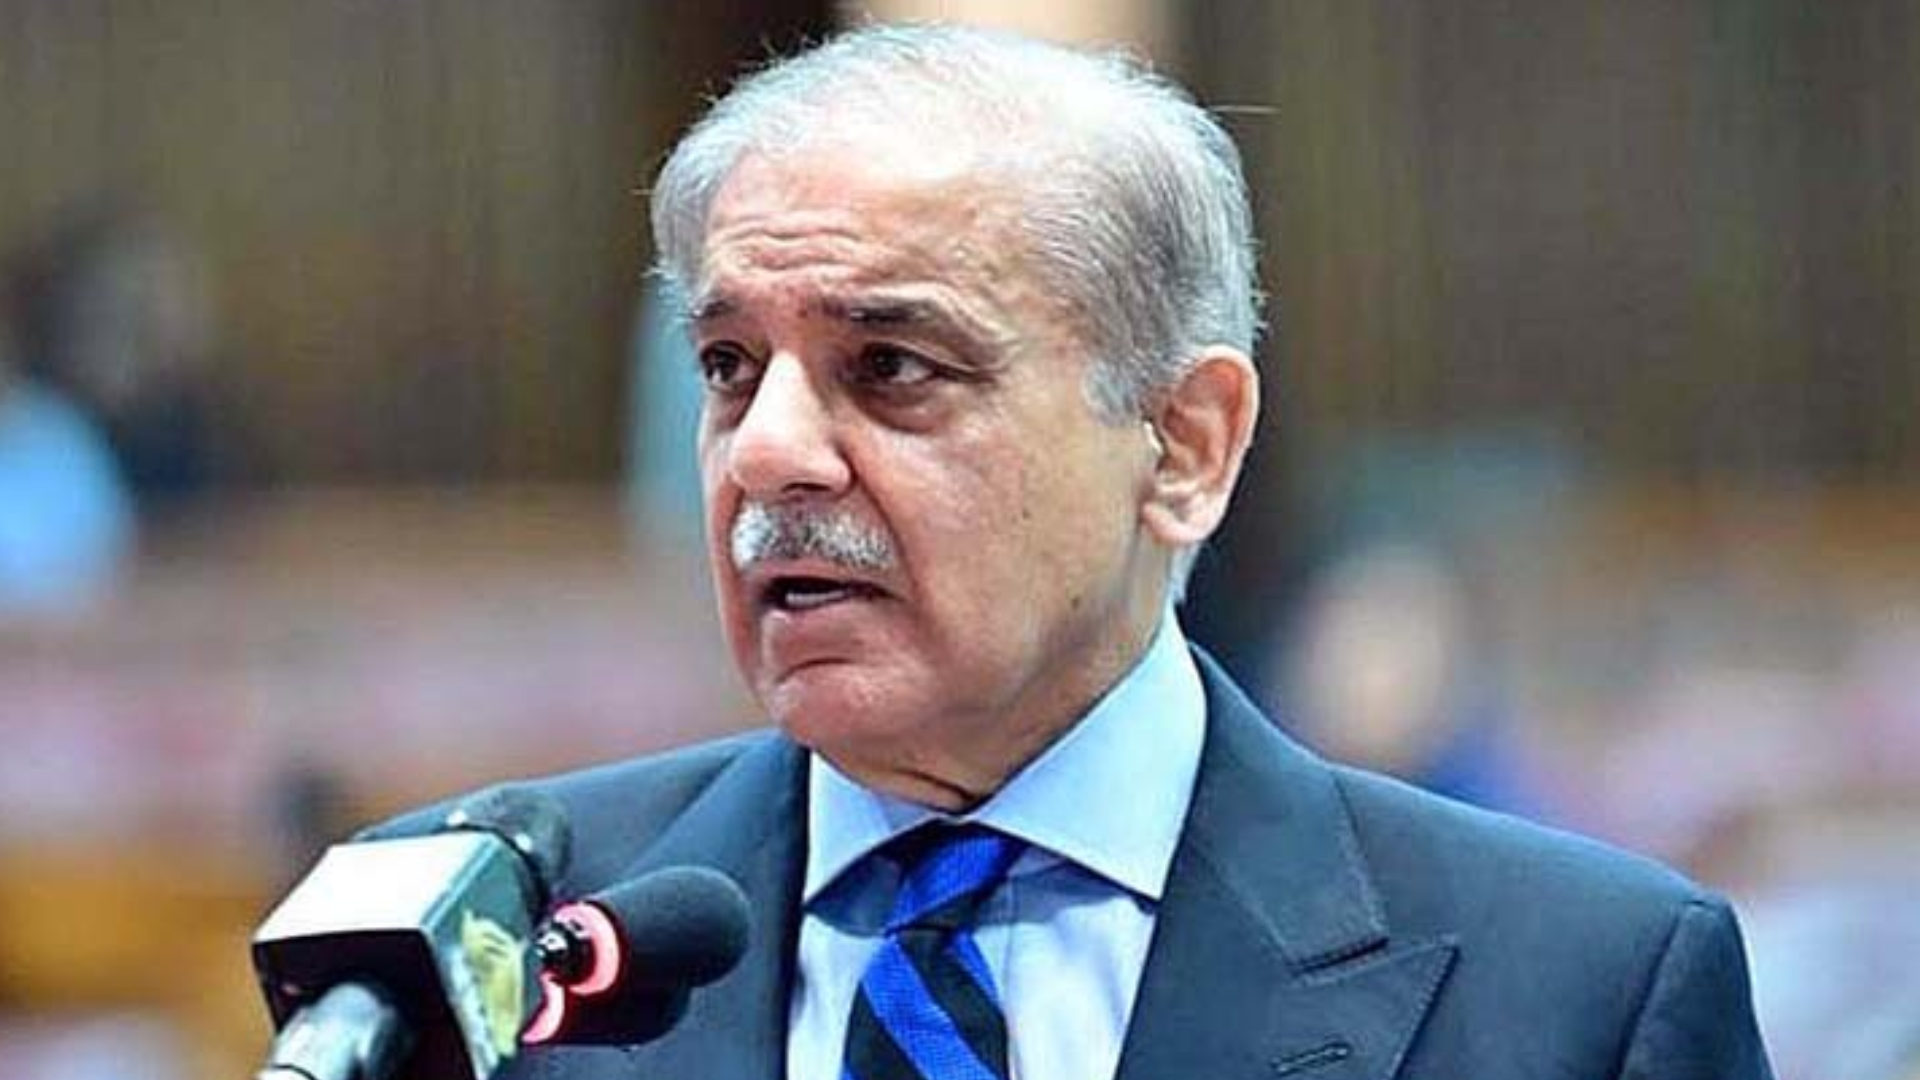 Pakistan’s Economic Woes Continue As PM Shehbaz Sharif Bans Red Carpets At Official Events To Cut Costs